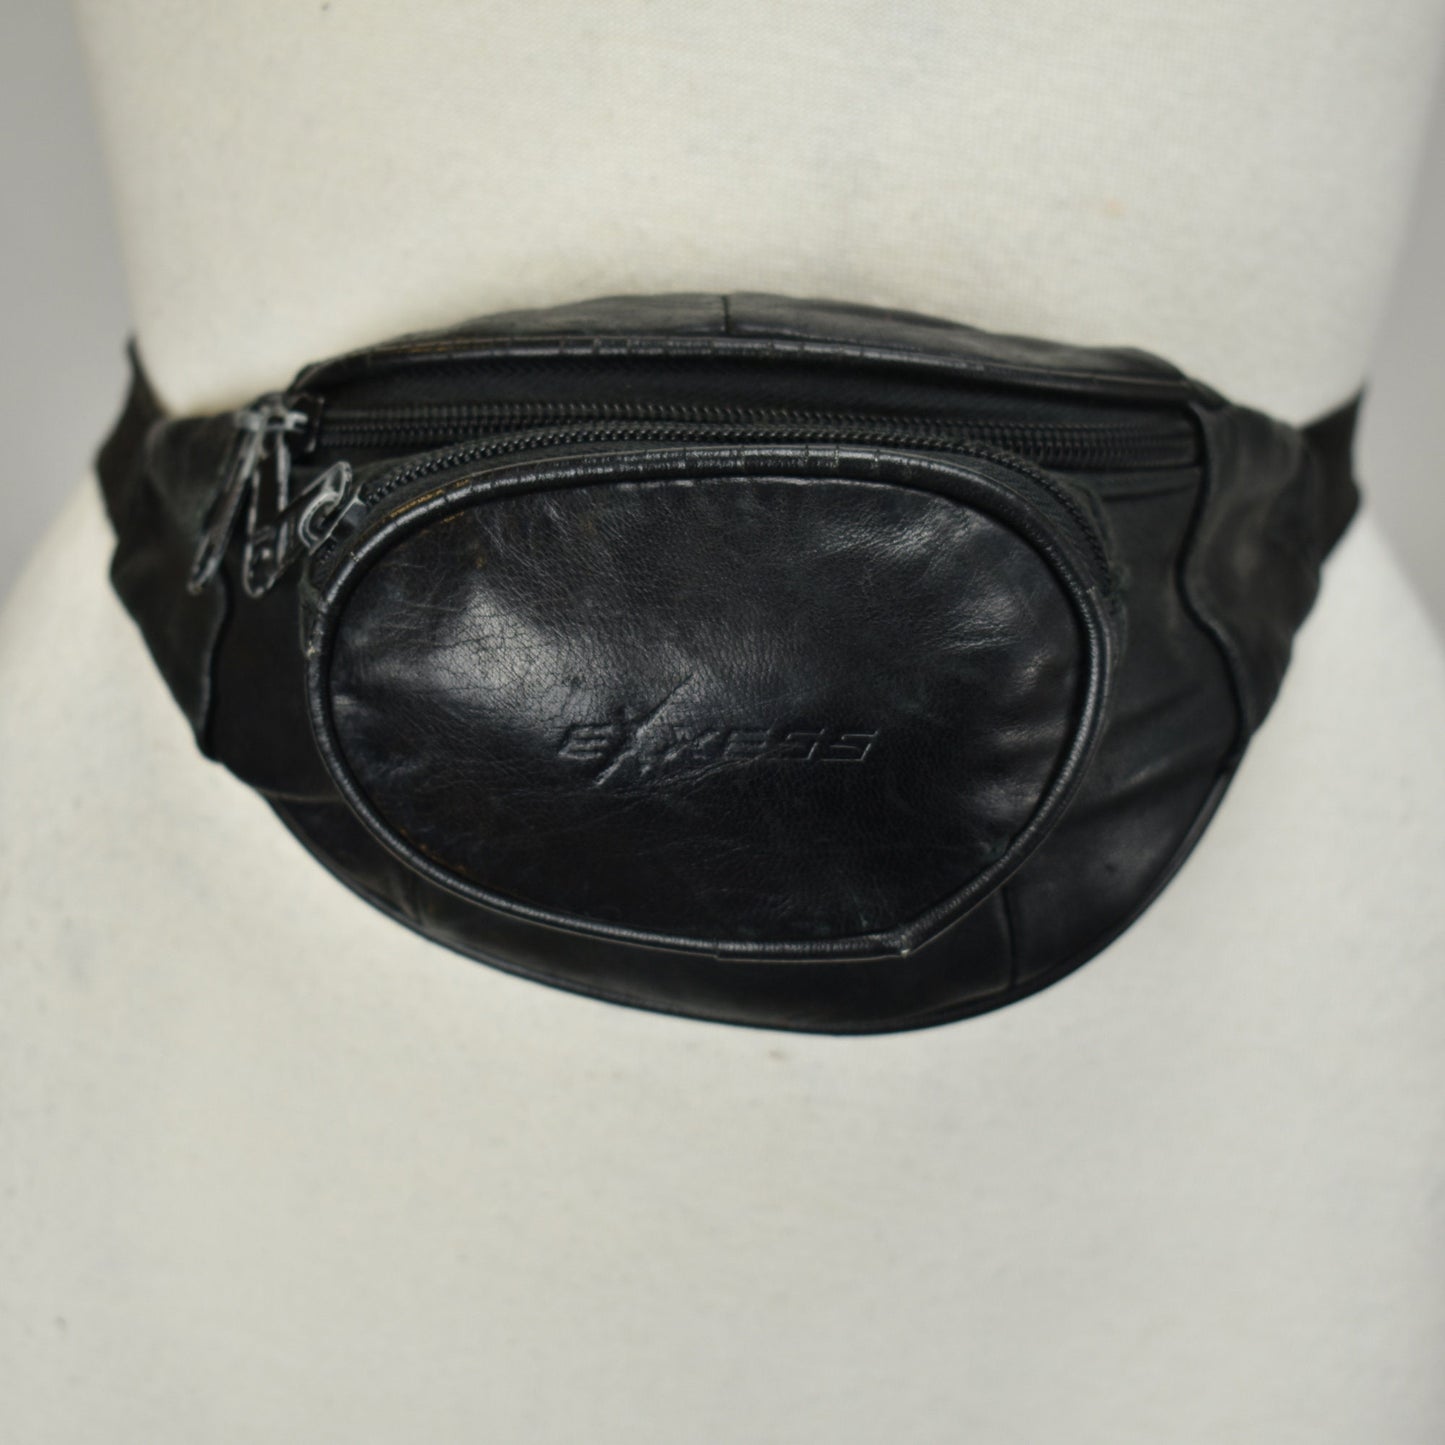 Vintage 90s Mini Fanny Pack by Excess - Butter Soft Leather - Clean Interior